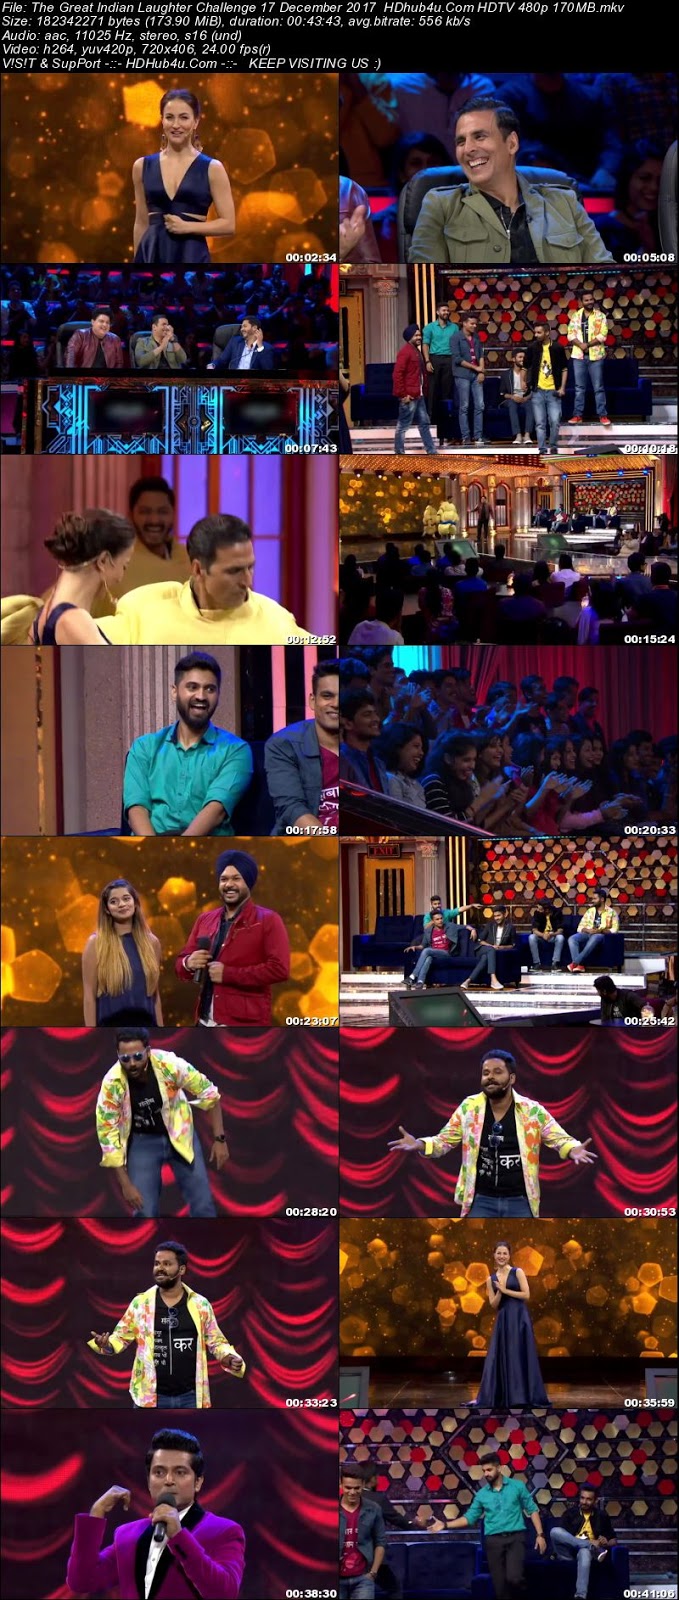 The Great Indian Laughter Challenge 17th December 480p HDTV 170MB Download